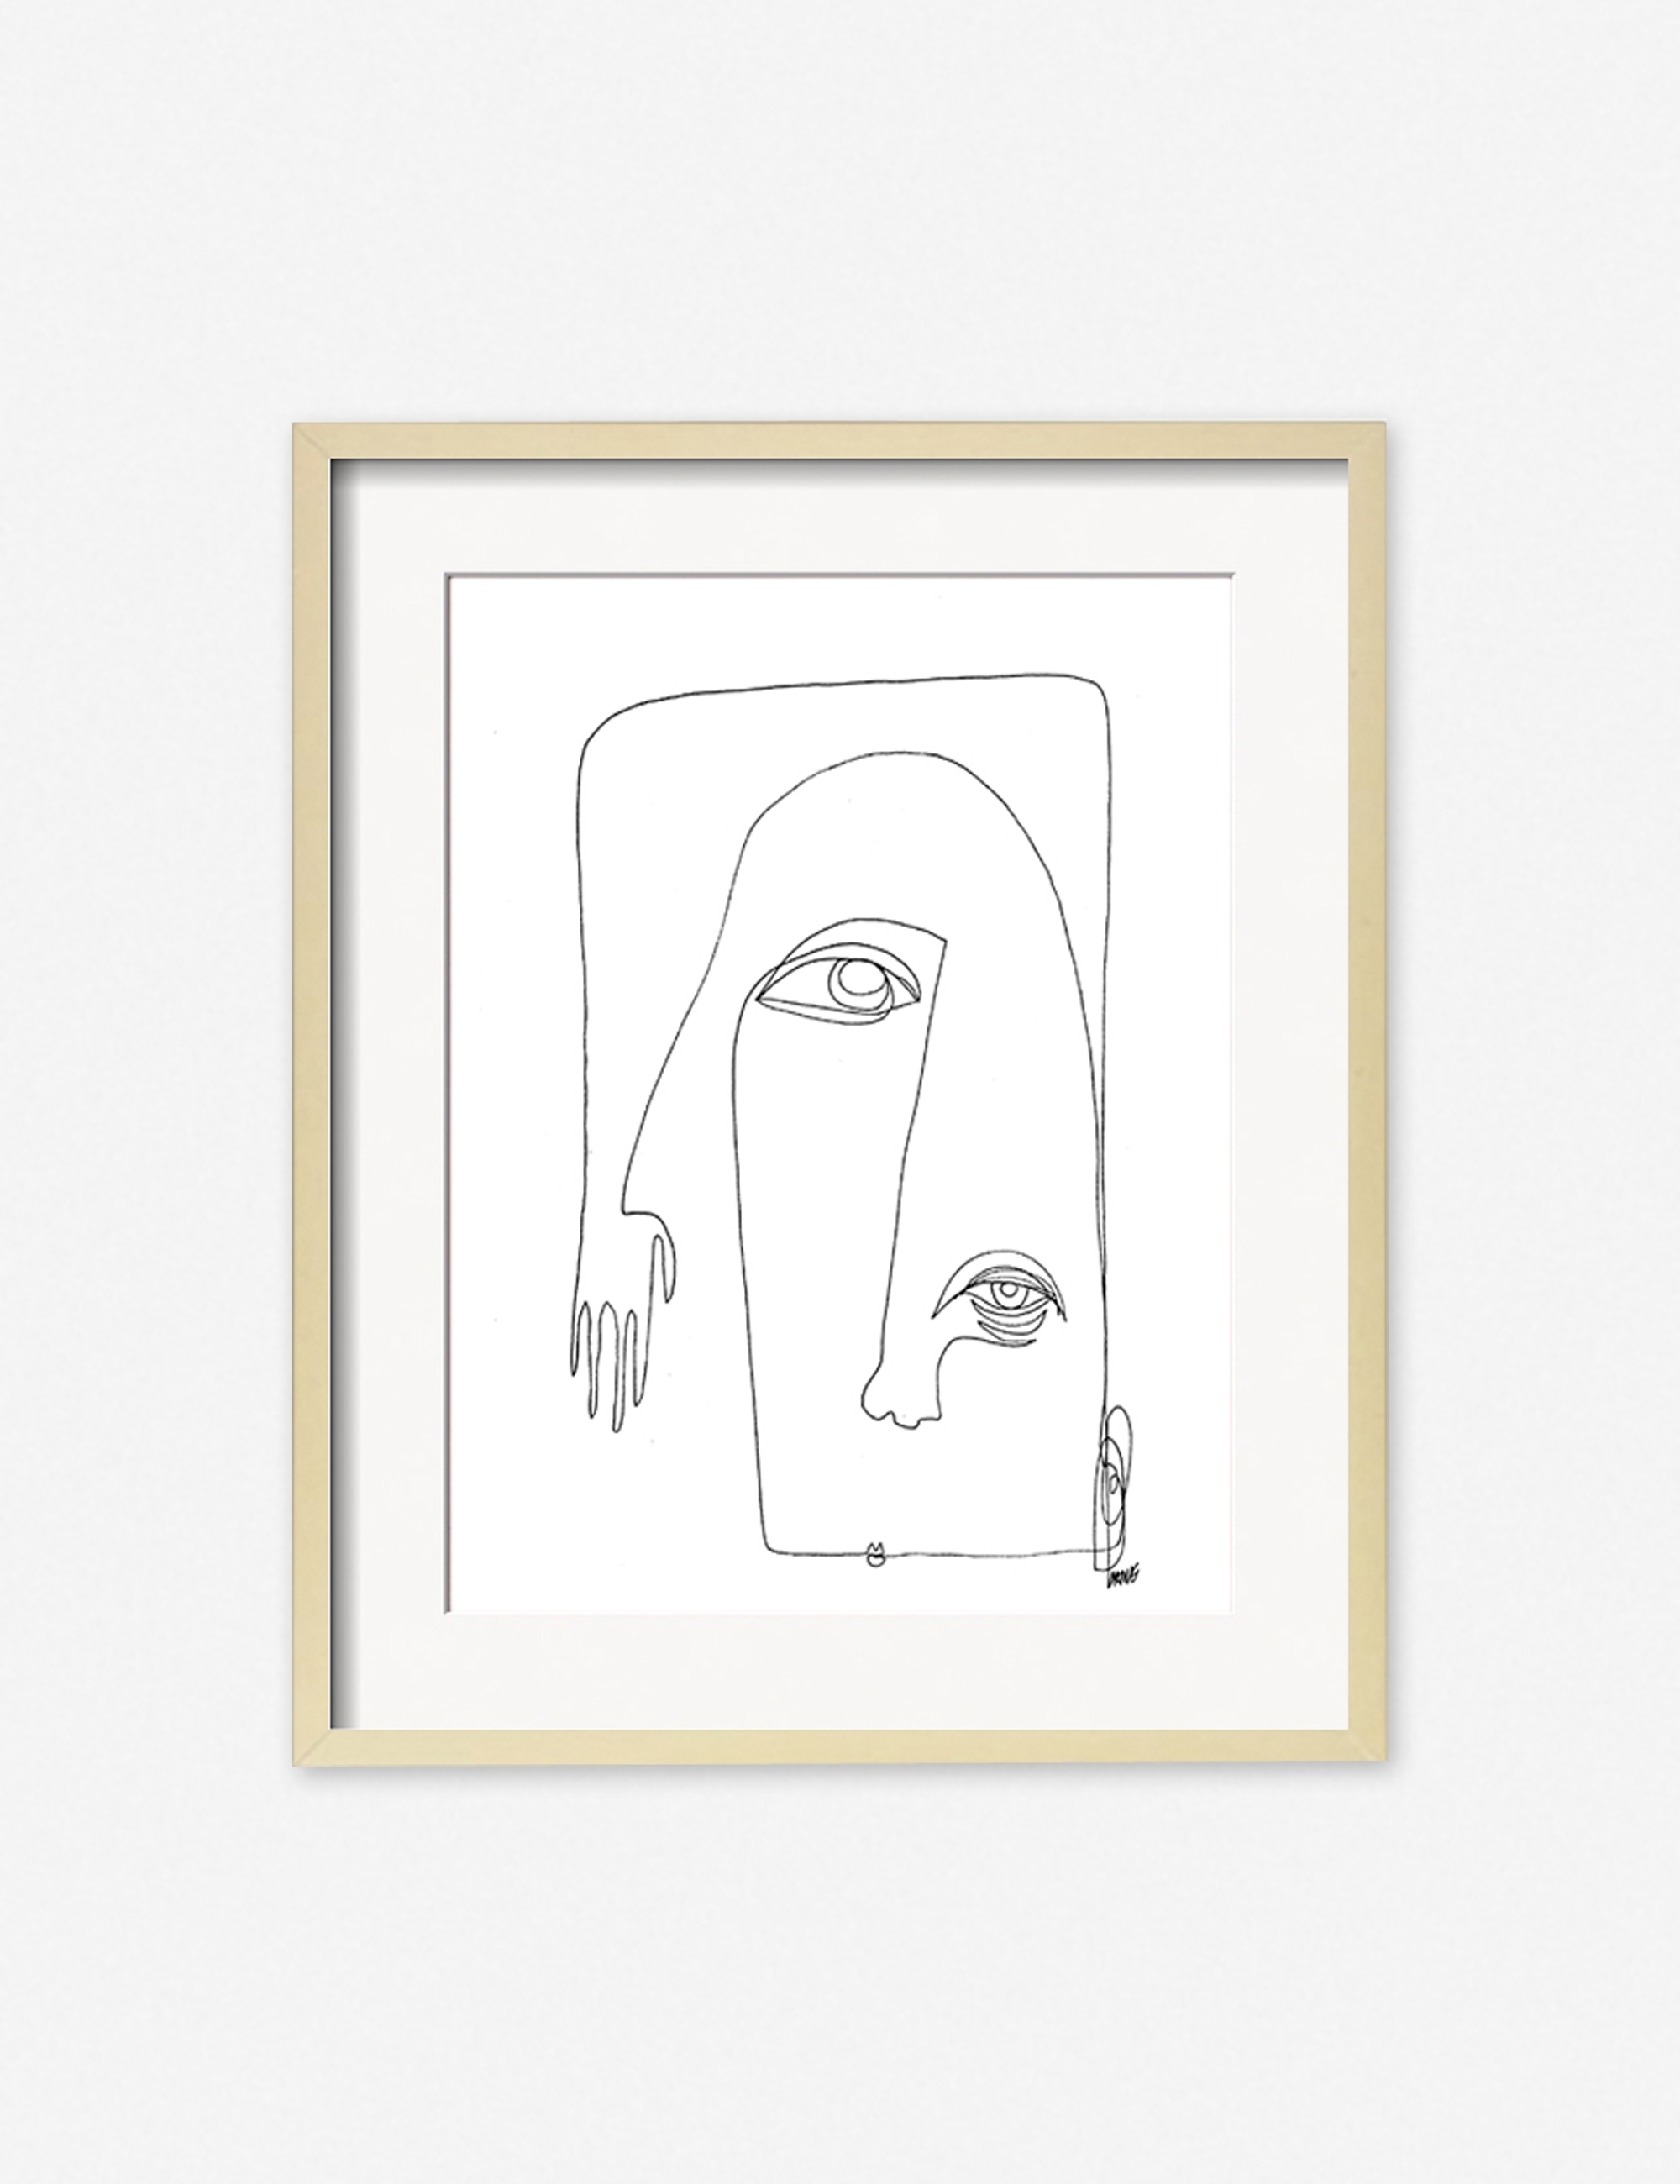 Picasso Print by Damienne Merlina - Image 4